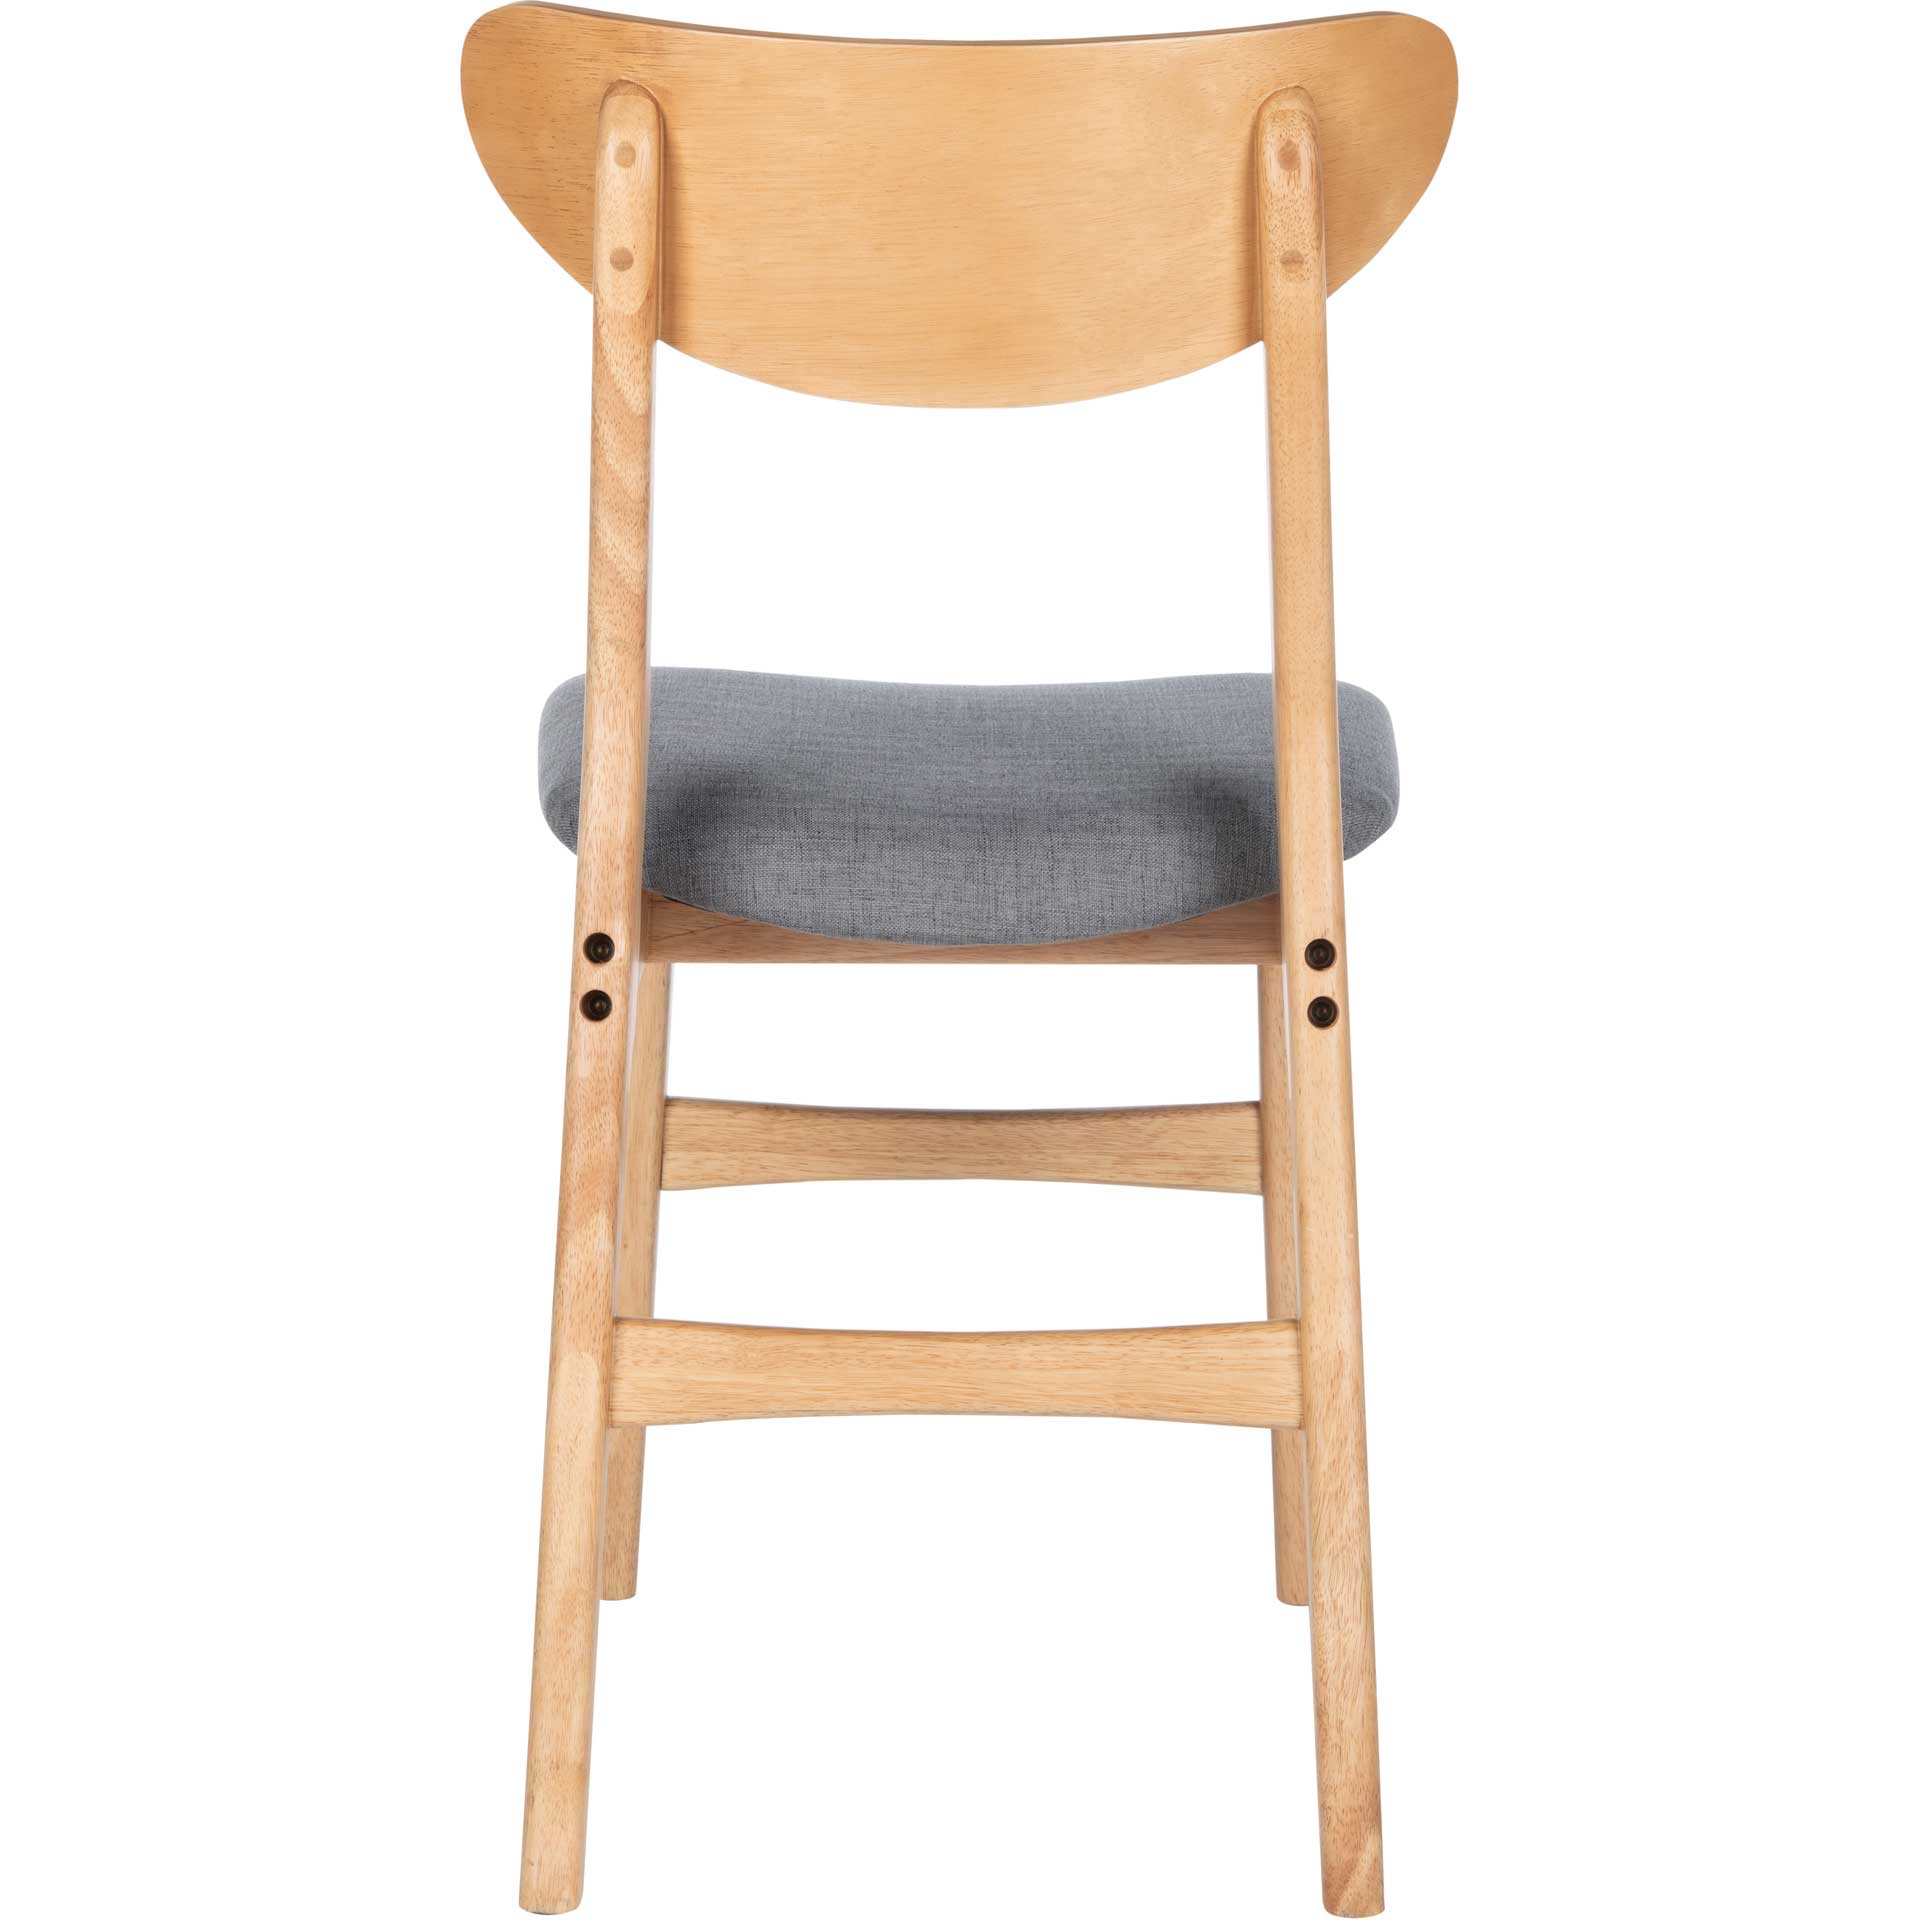 Lucas Retro Dining Chair Natural/Gray (Set of 2)